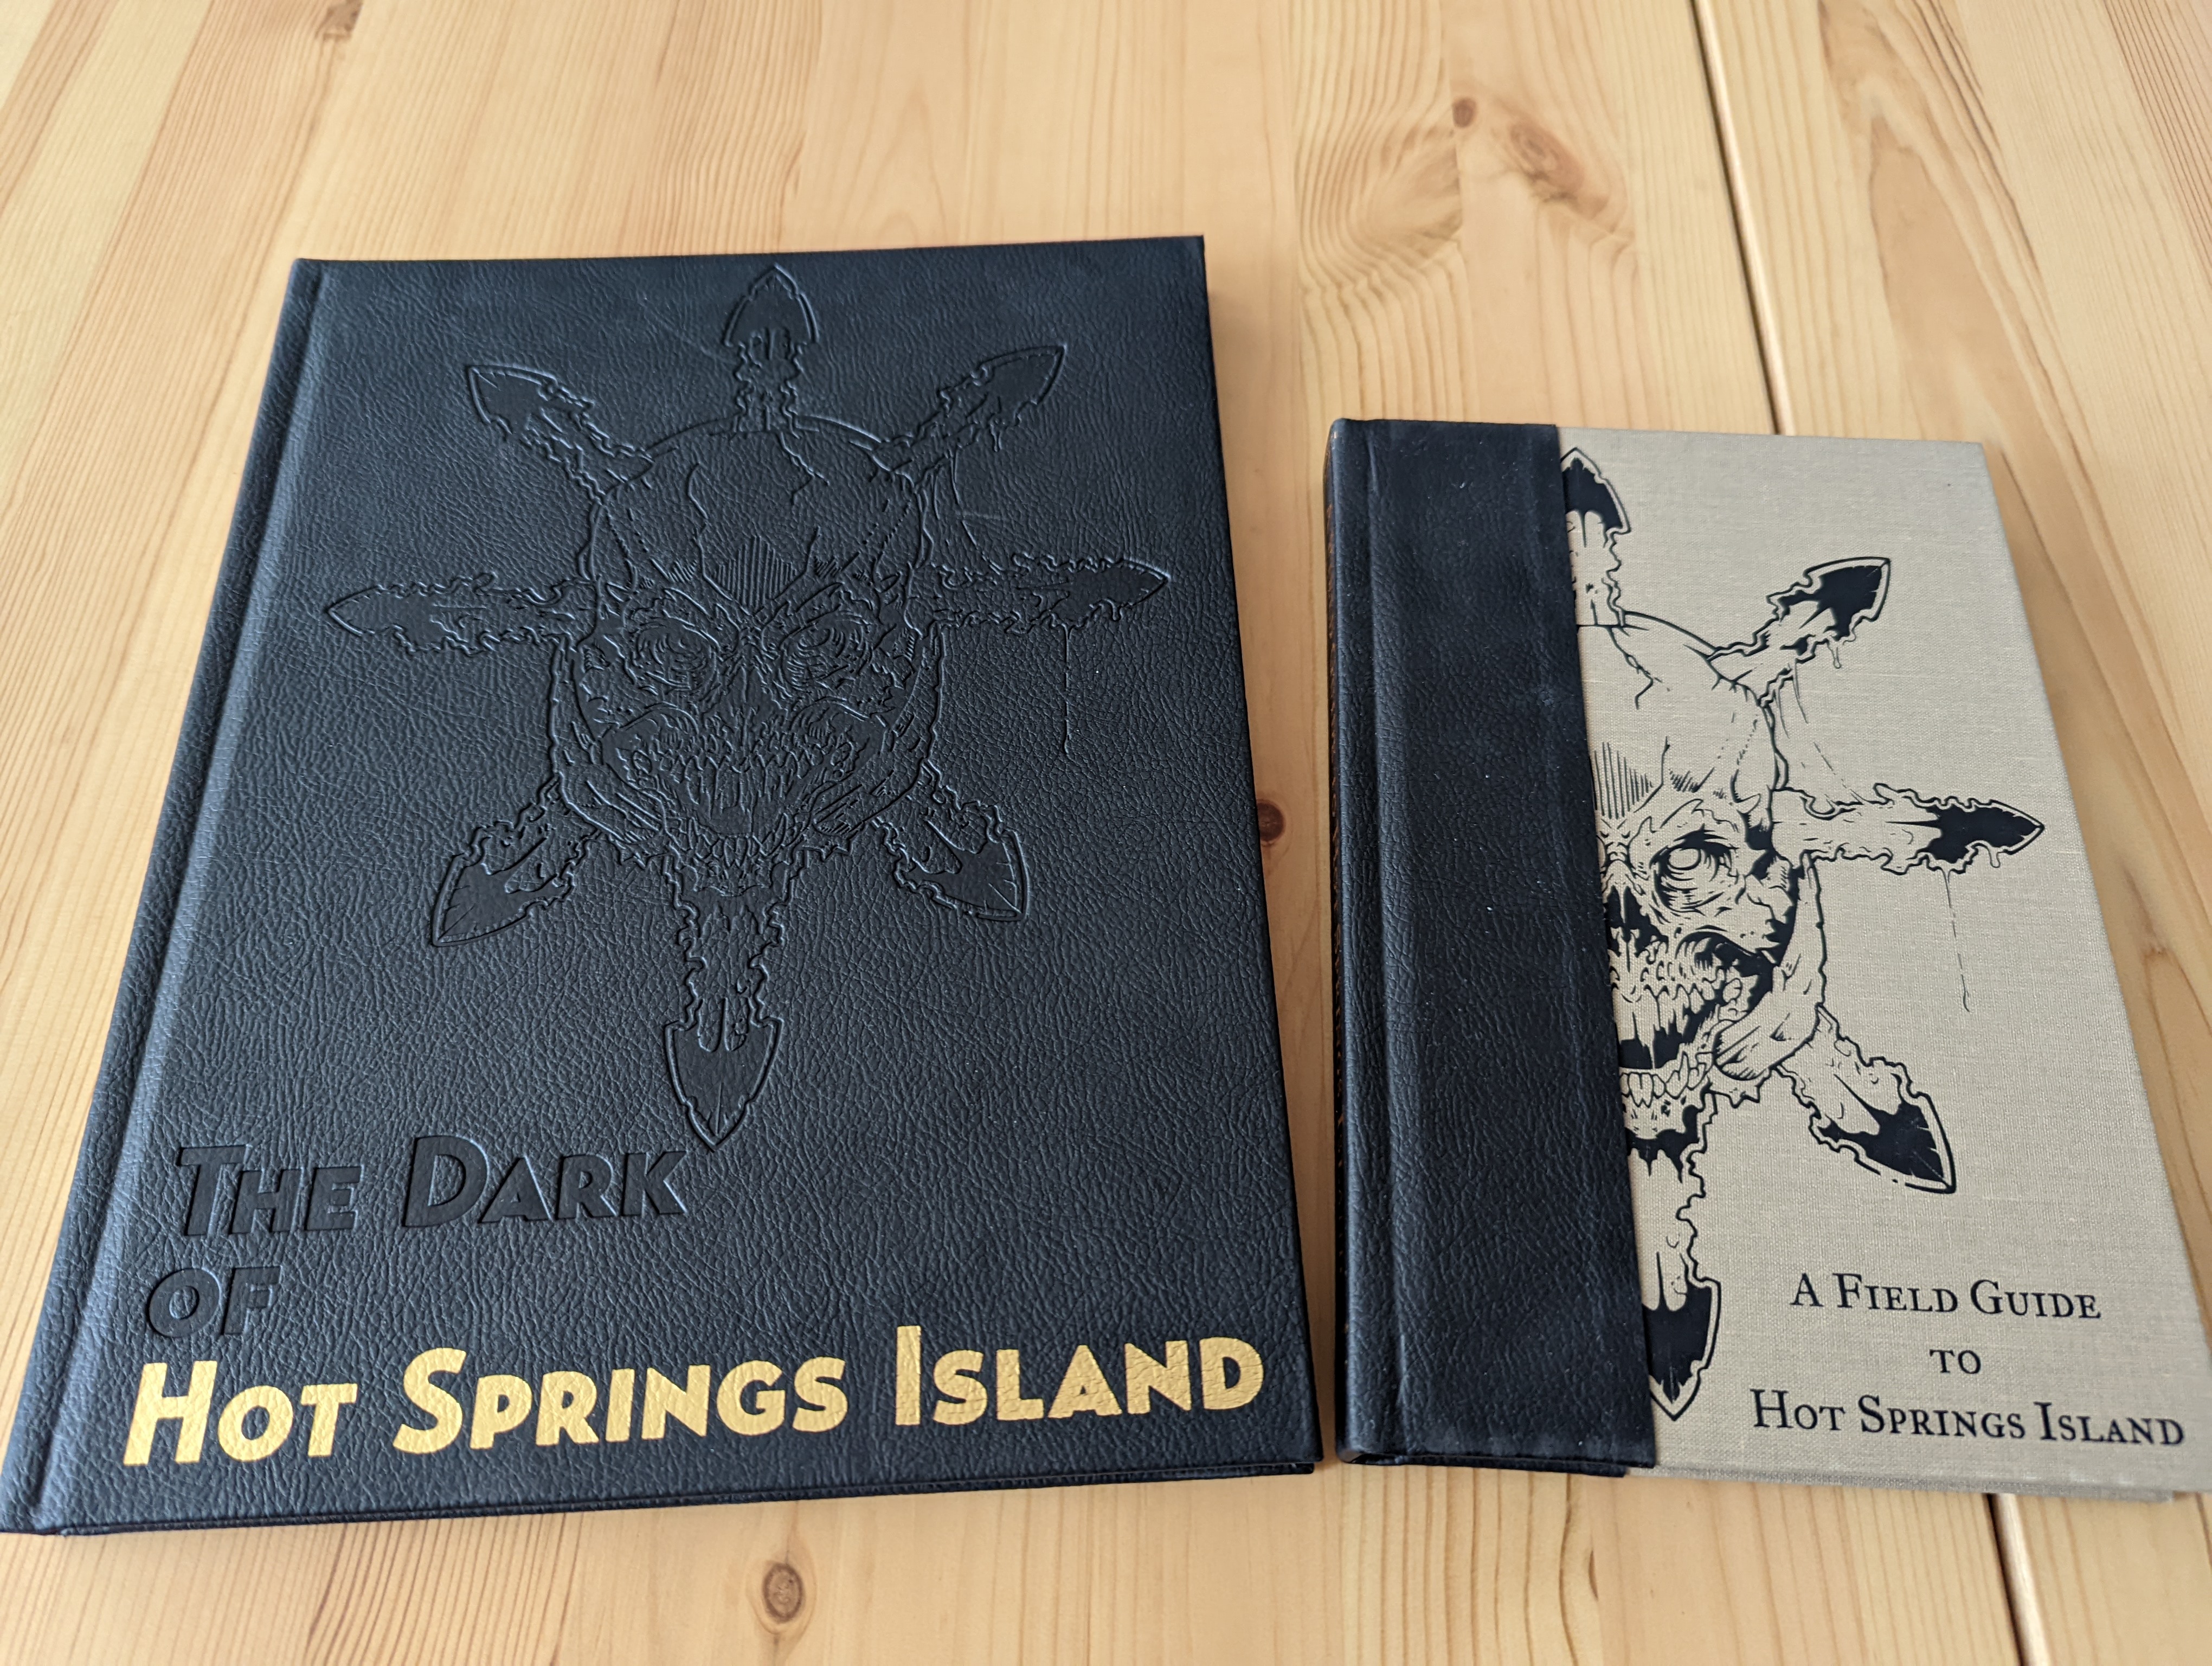 The Dark of Hot Springs Island & A Field Guide to Hot Springs Island.